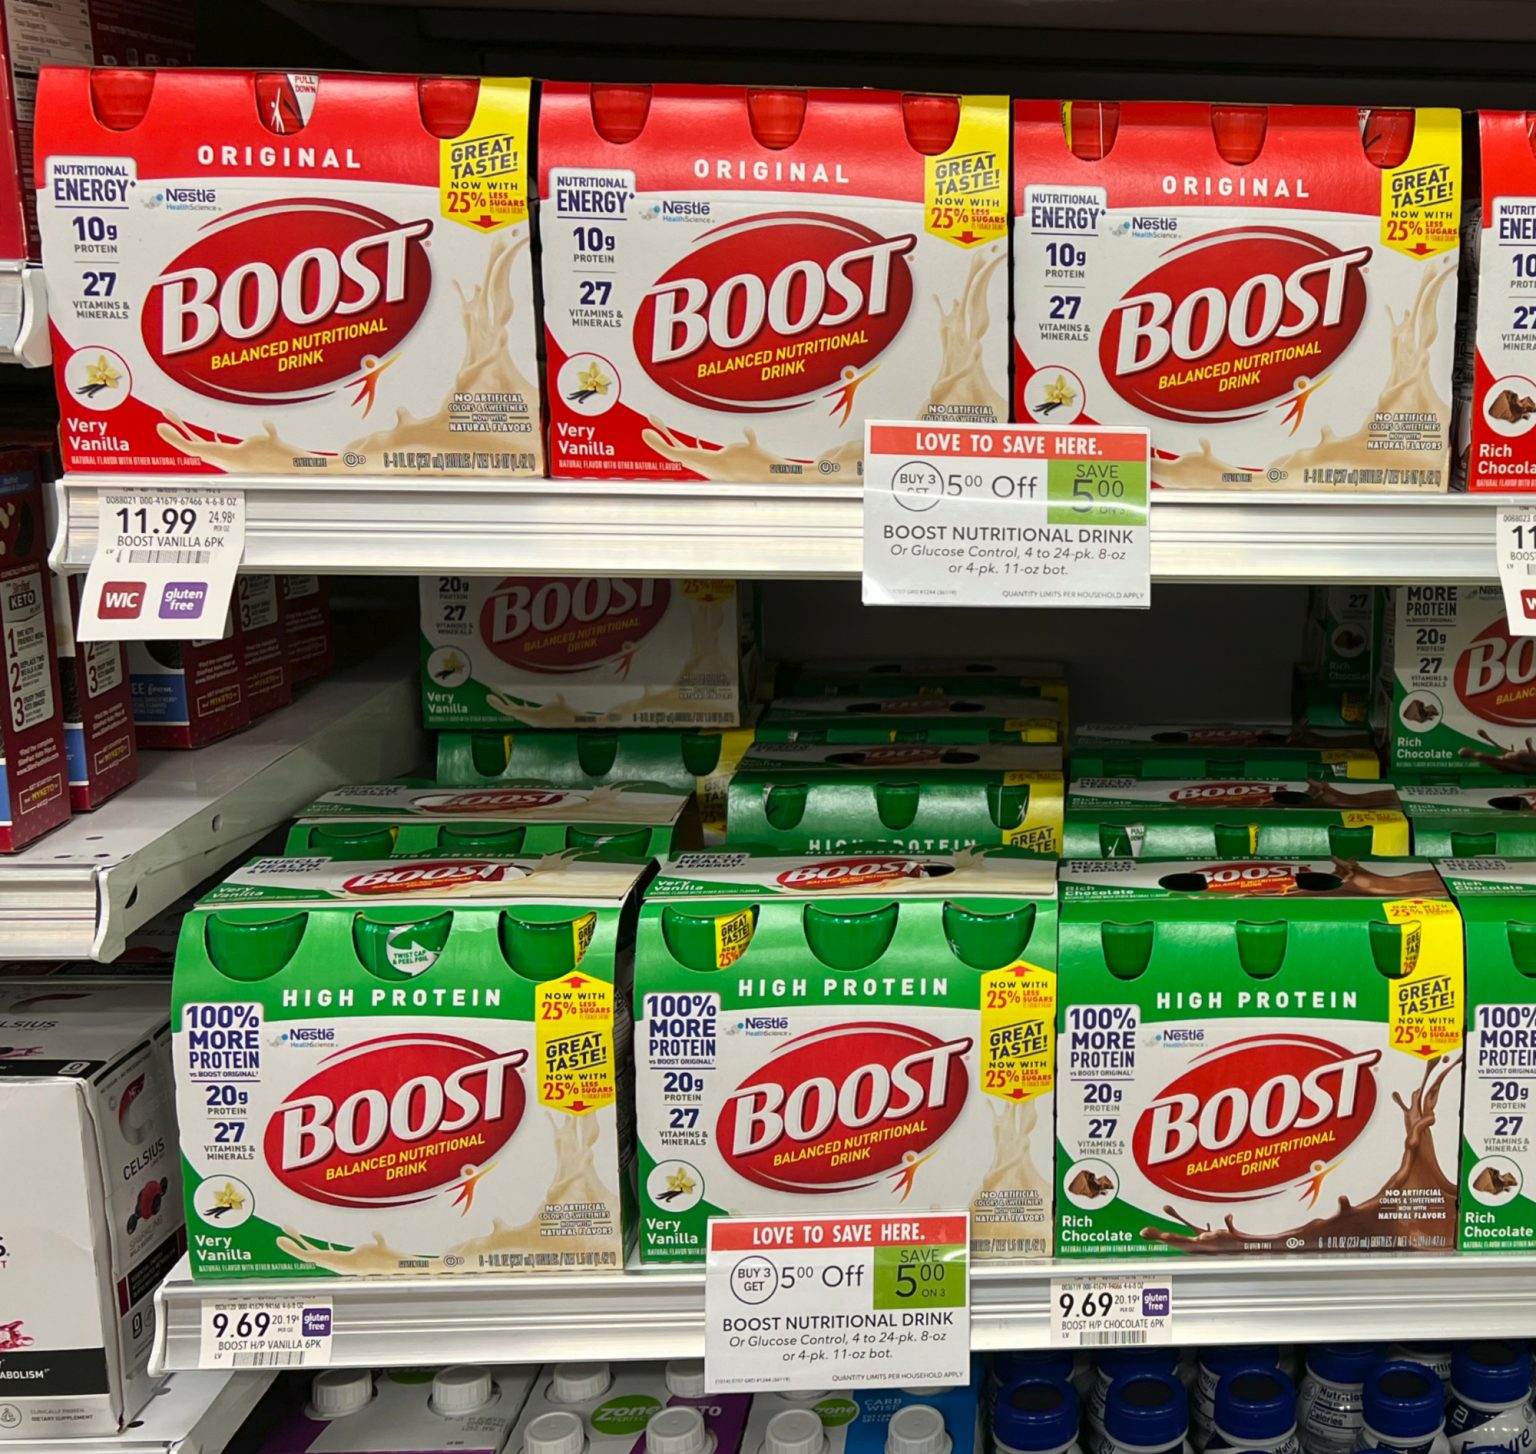 get-boost-nutritional-drinks-for-as-low-as-6-02-per-pack-at-publix